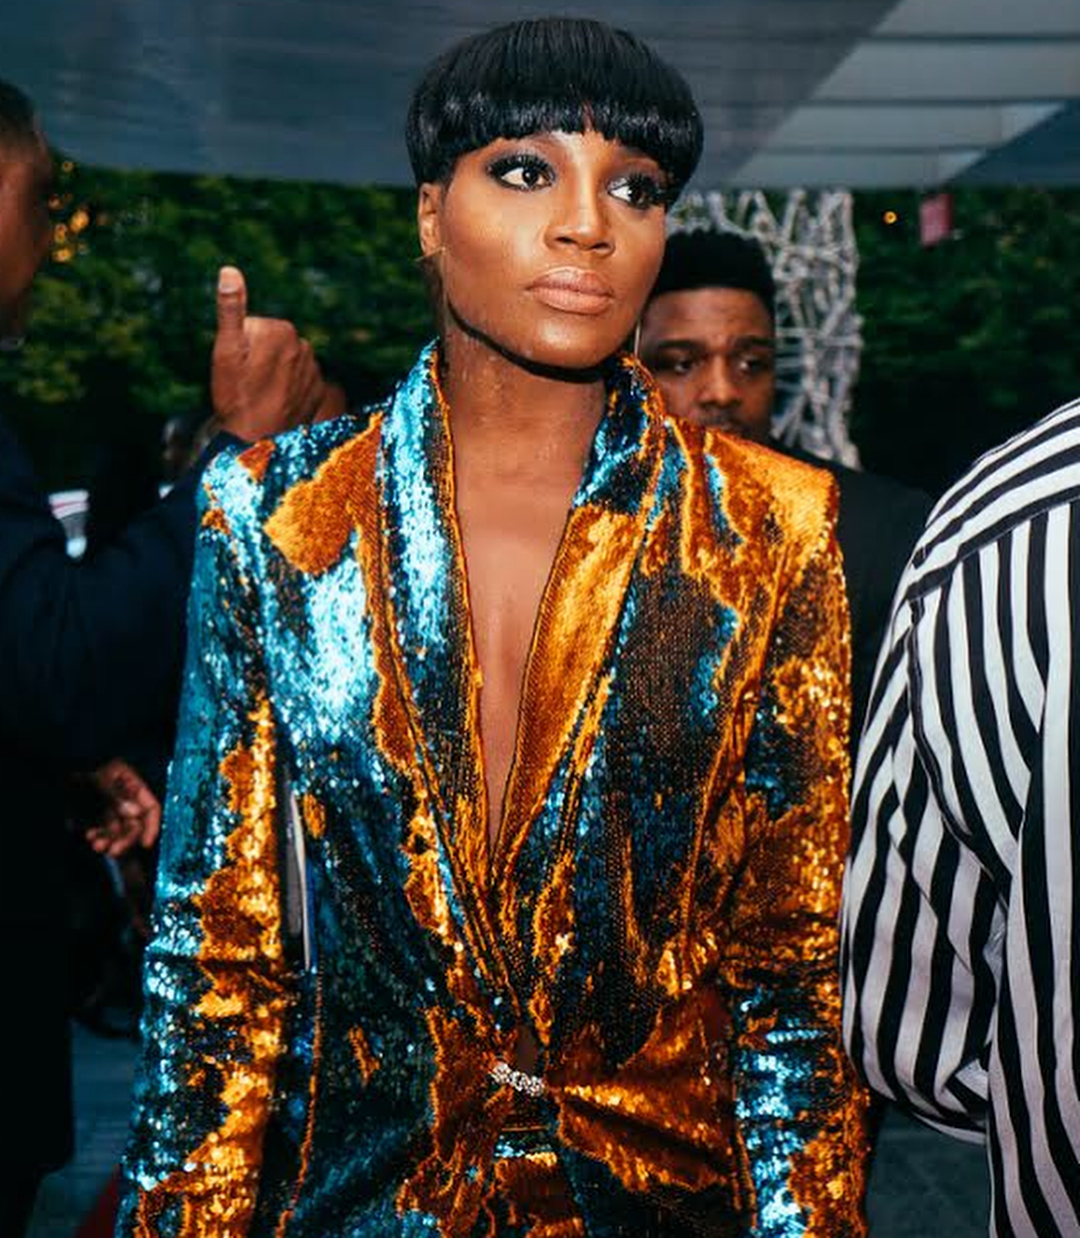 Seyi Shay Wore the Sparkliest Sequin Suit to the 2018 BMI Awards and She Looked AMAZING!